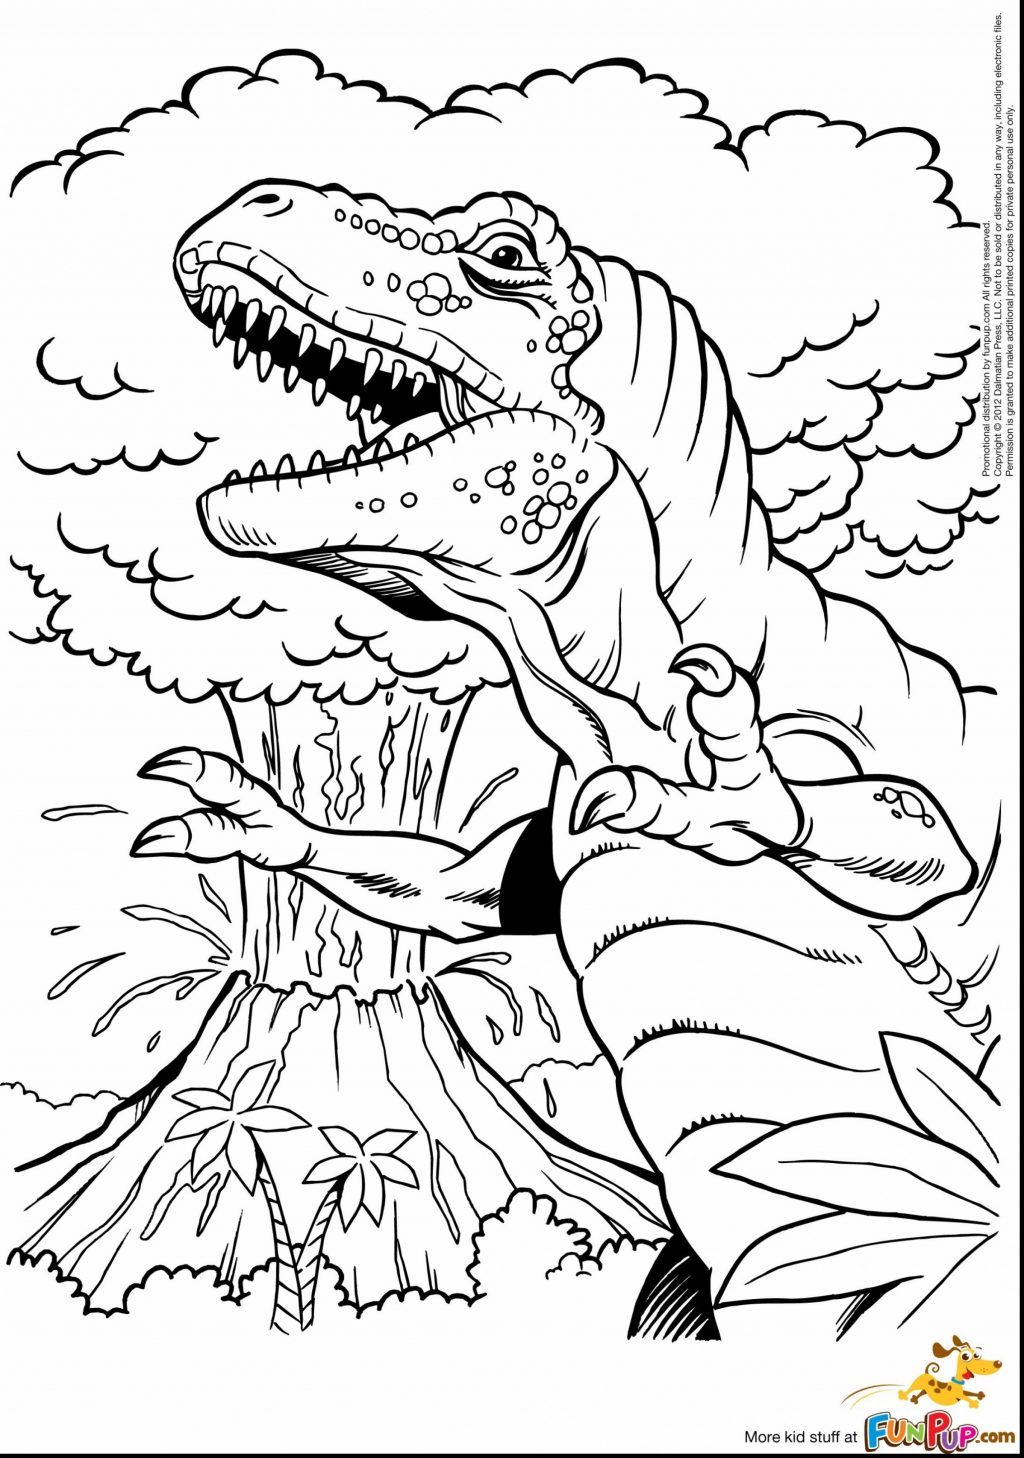 Coloring Pages : Coloring Page Dinosaur Sheets Amazing Image ...